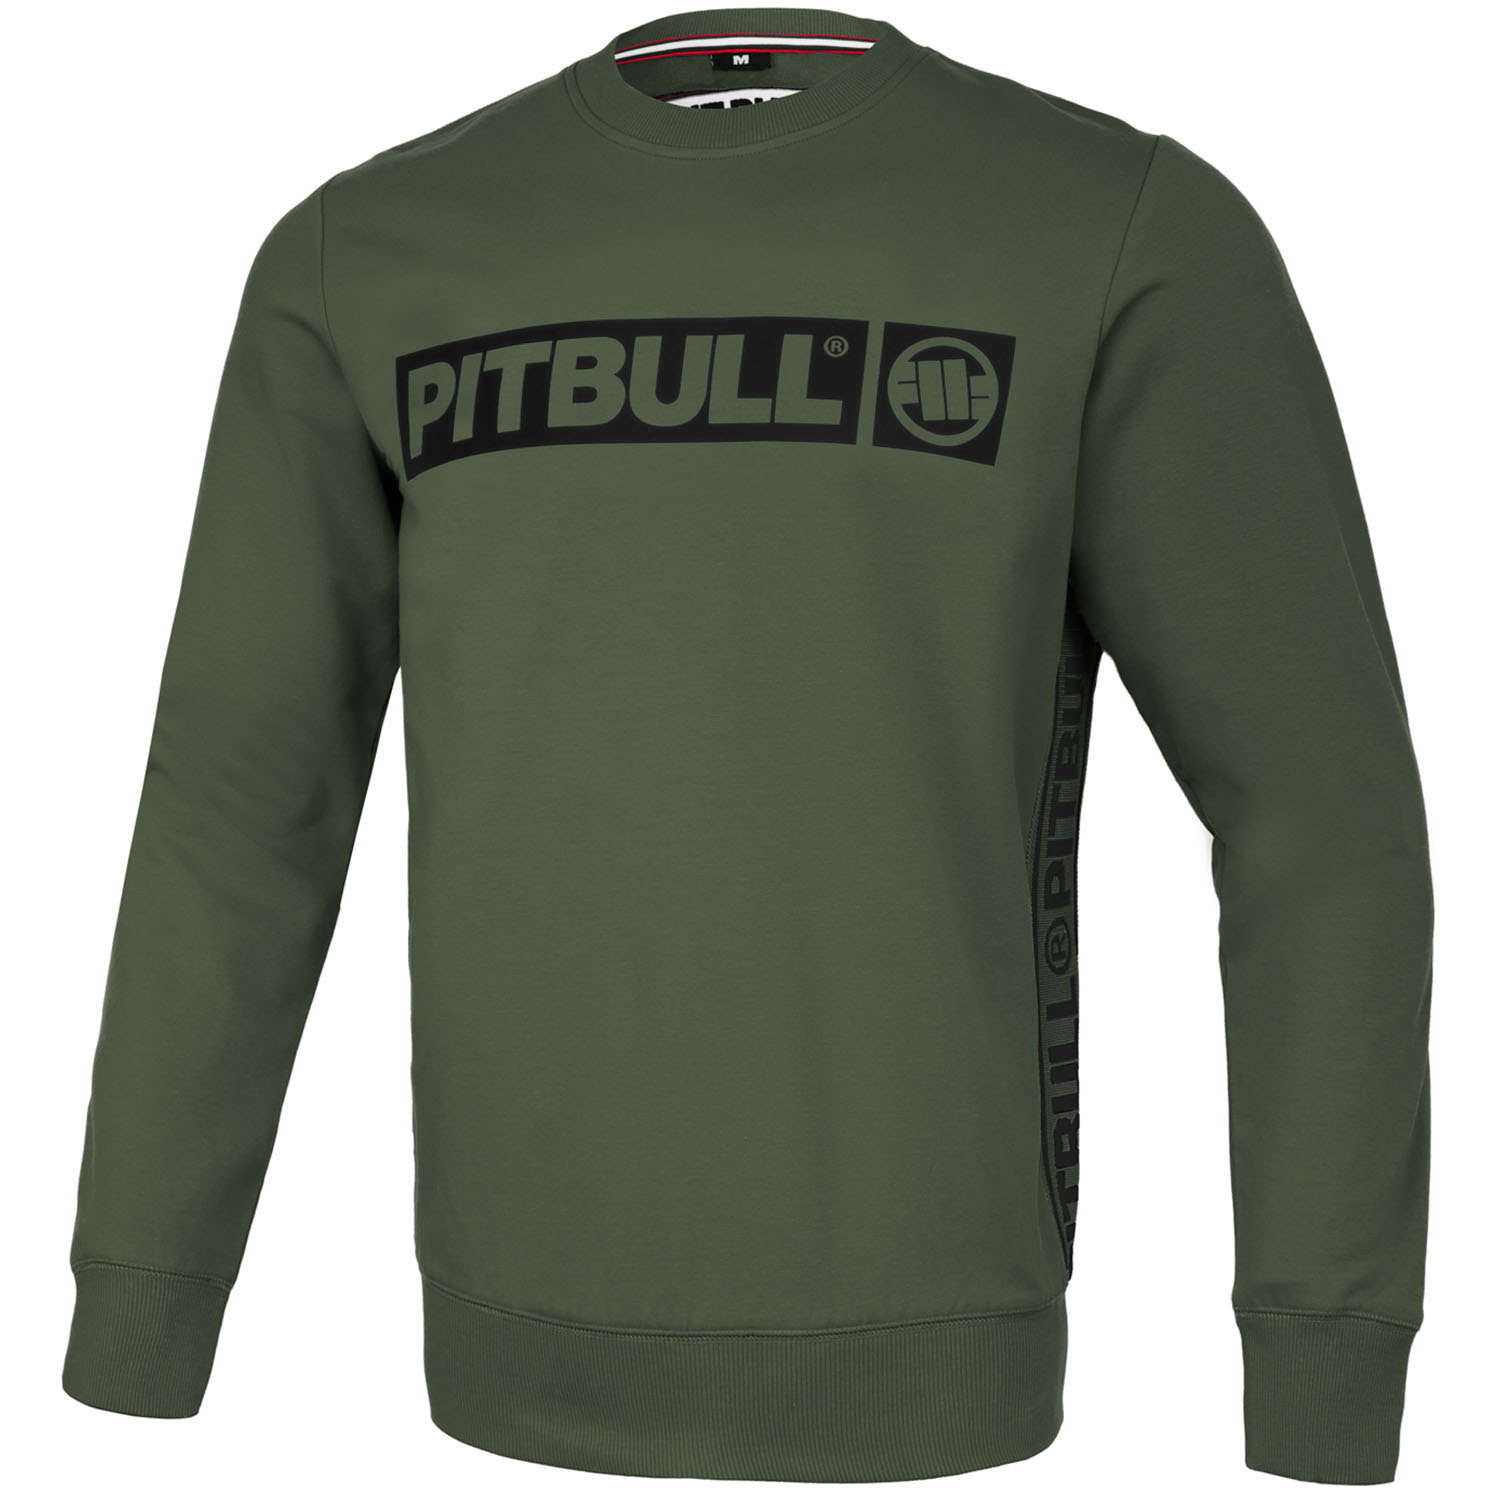 Pit Bull West Coast Pullover, Albion, olive, XXXL